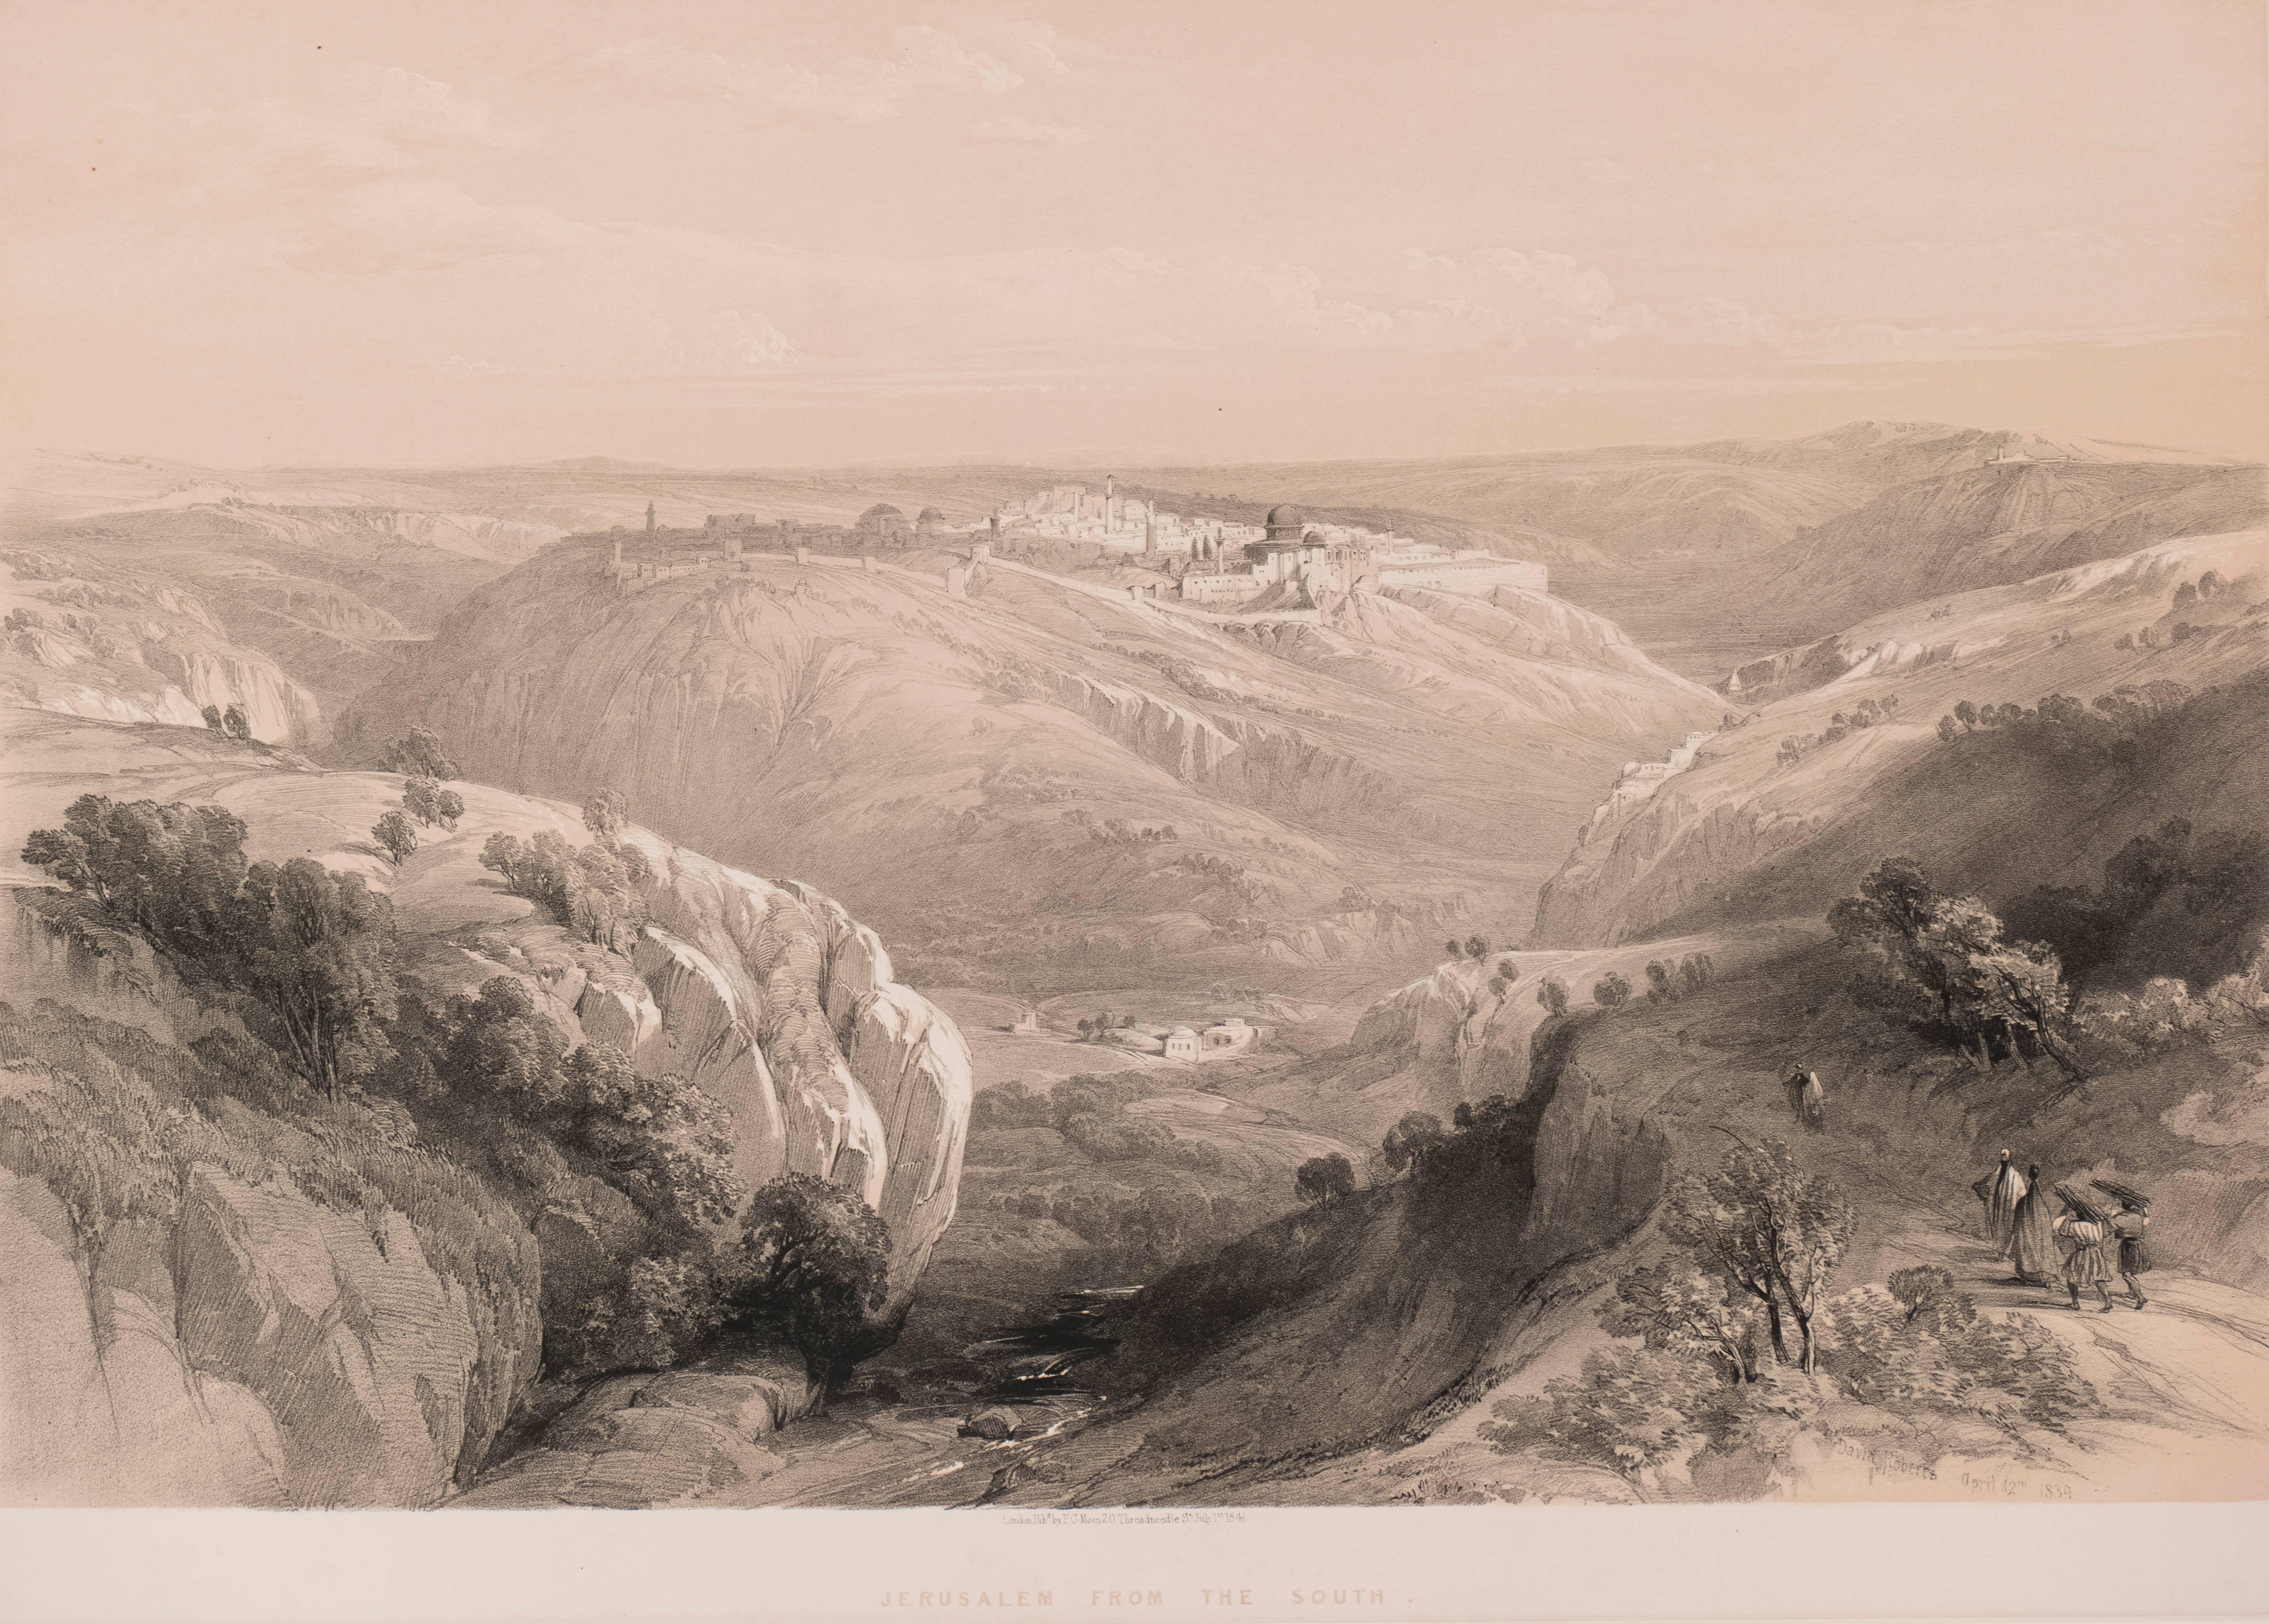 Jerusalem from the South - Print by David Roberts